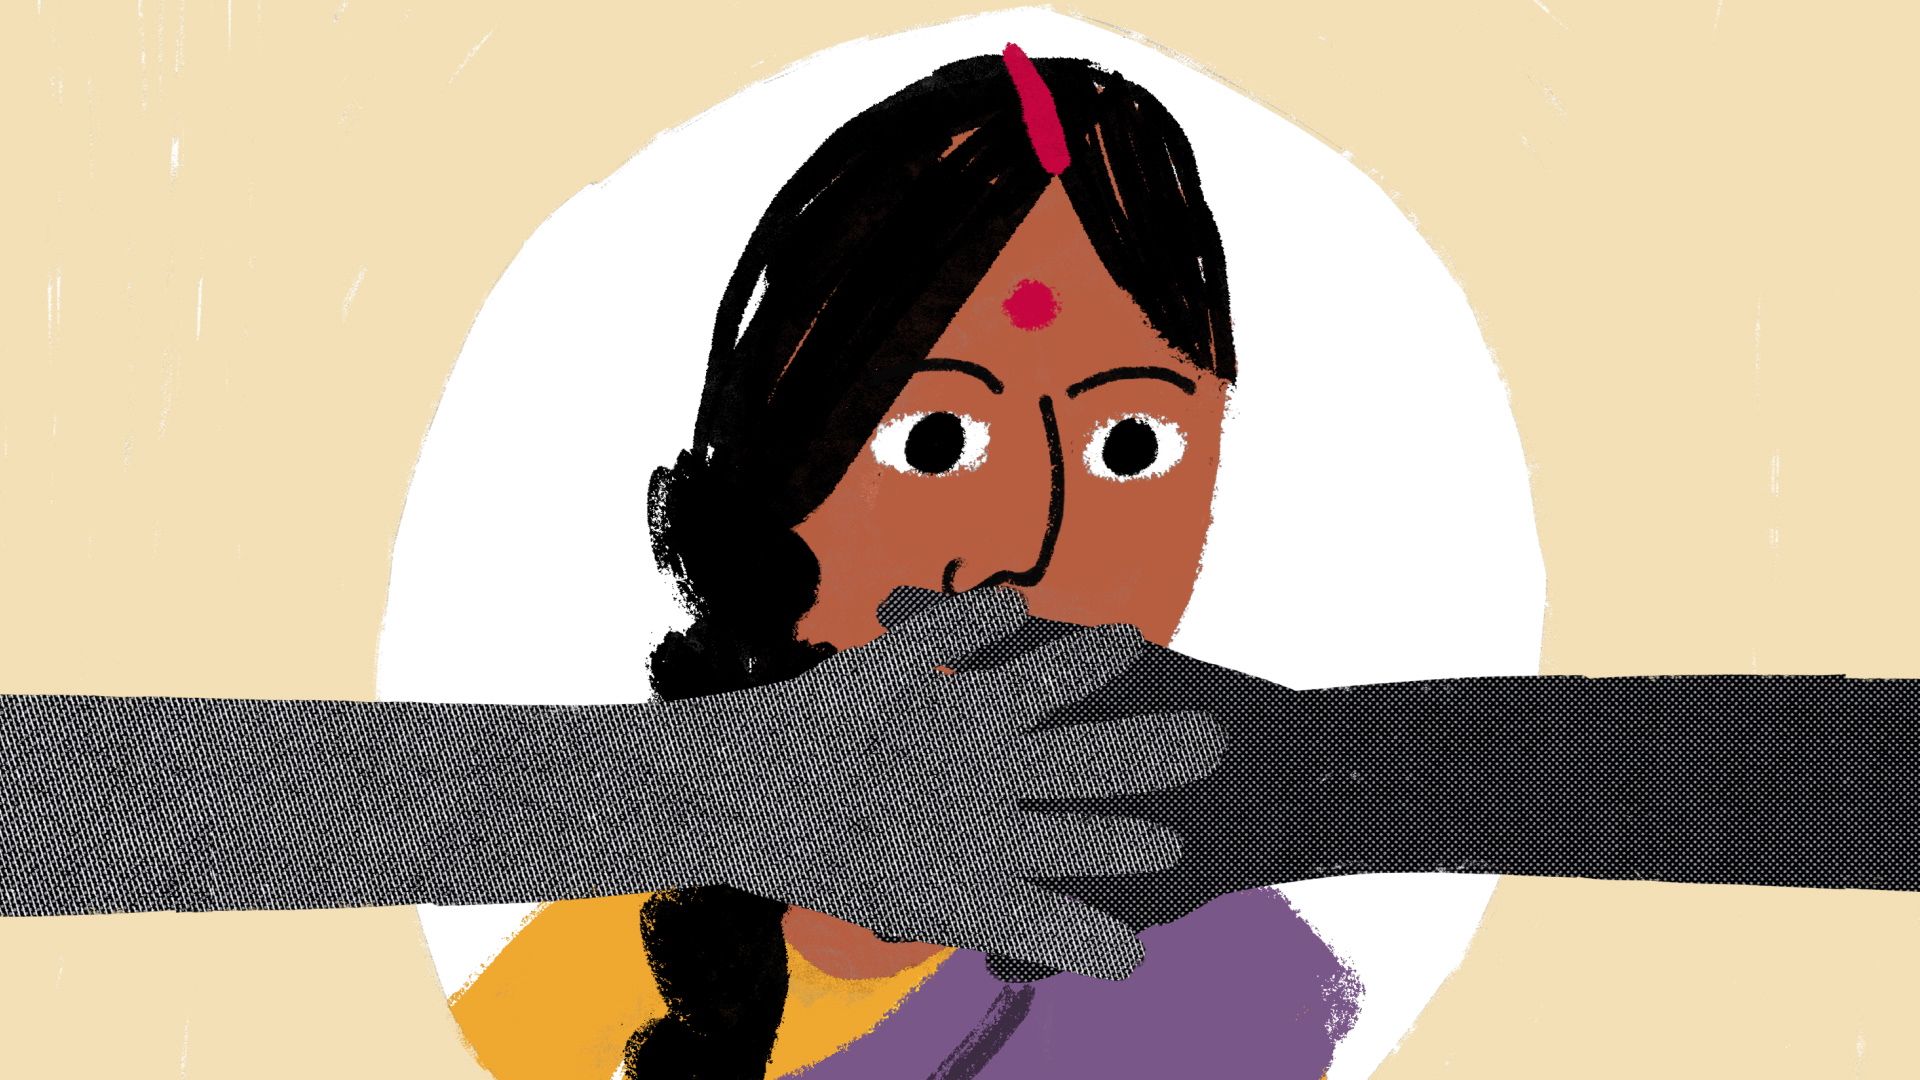 India: Women at Risk of Sexual Abuse at Work. Human Rights Watch